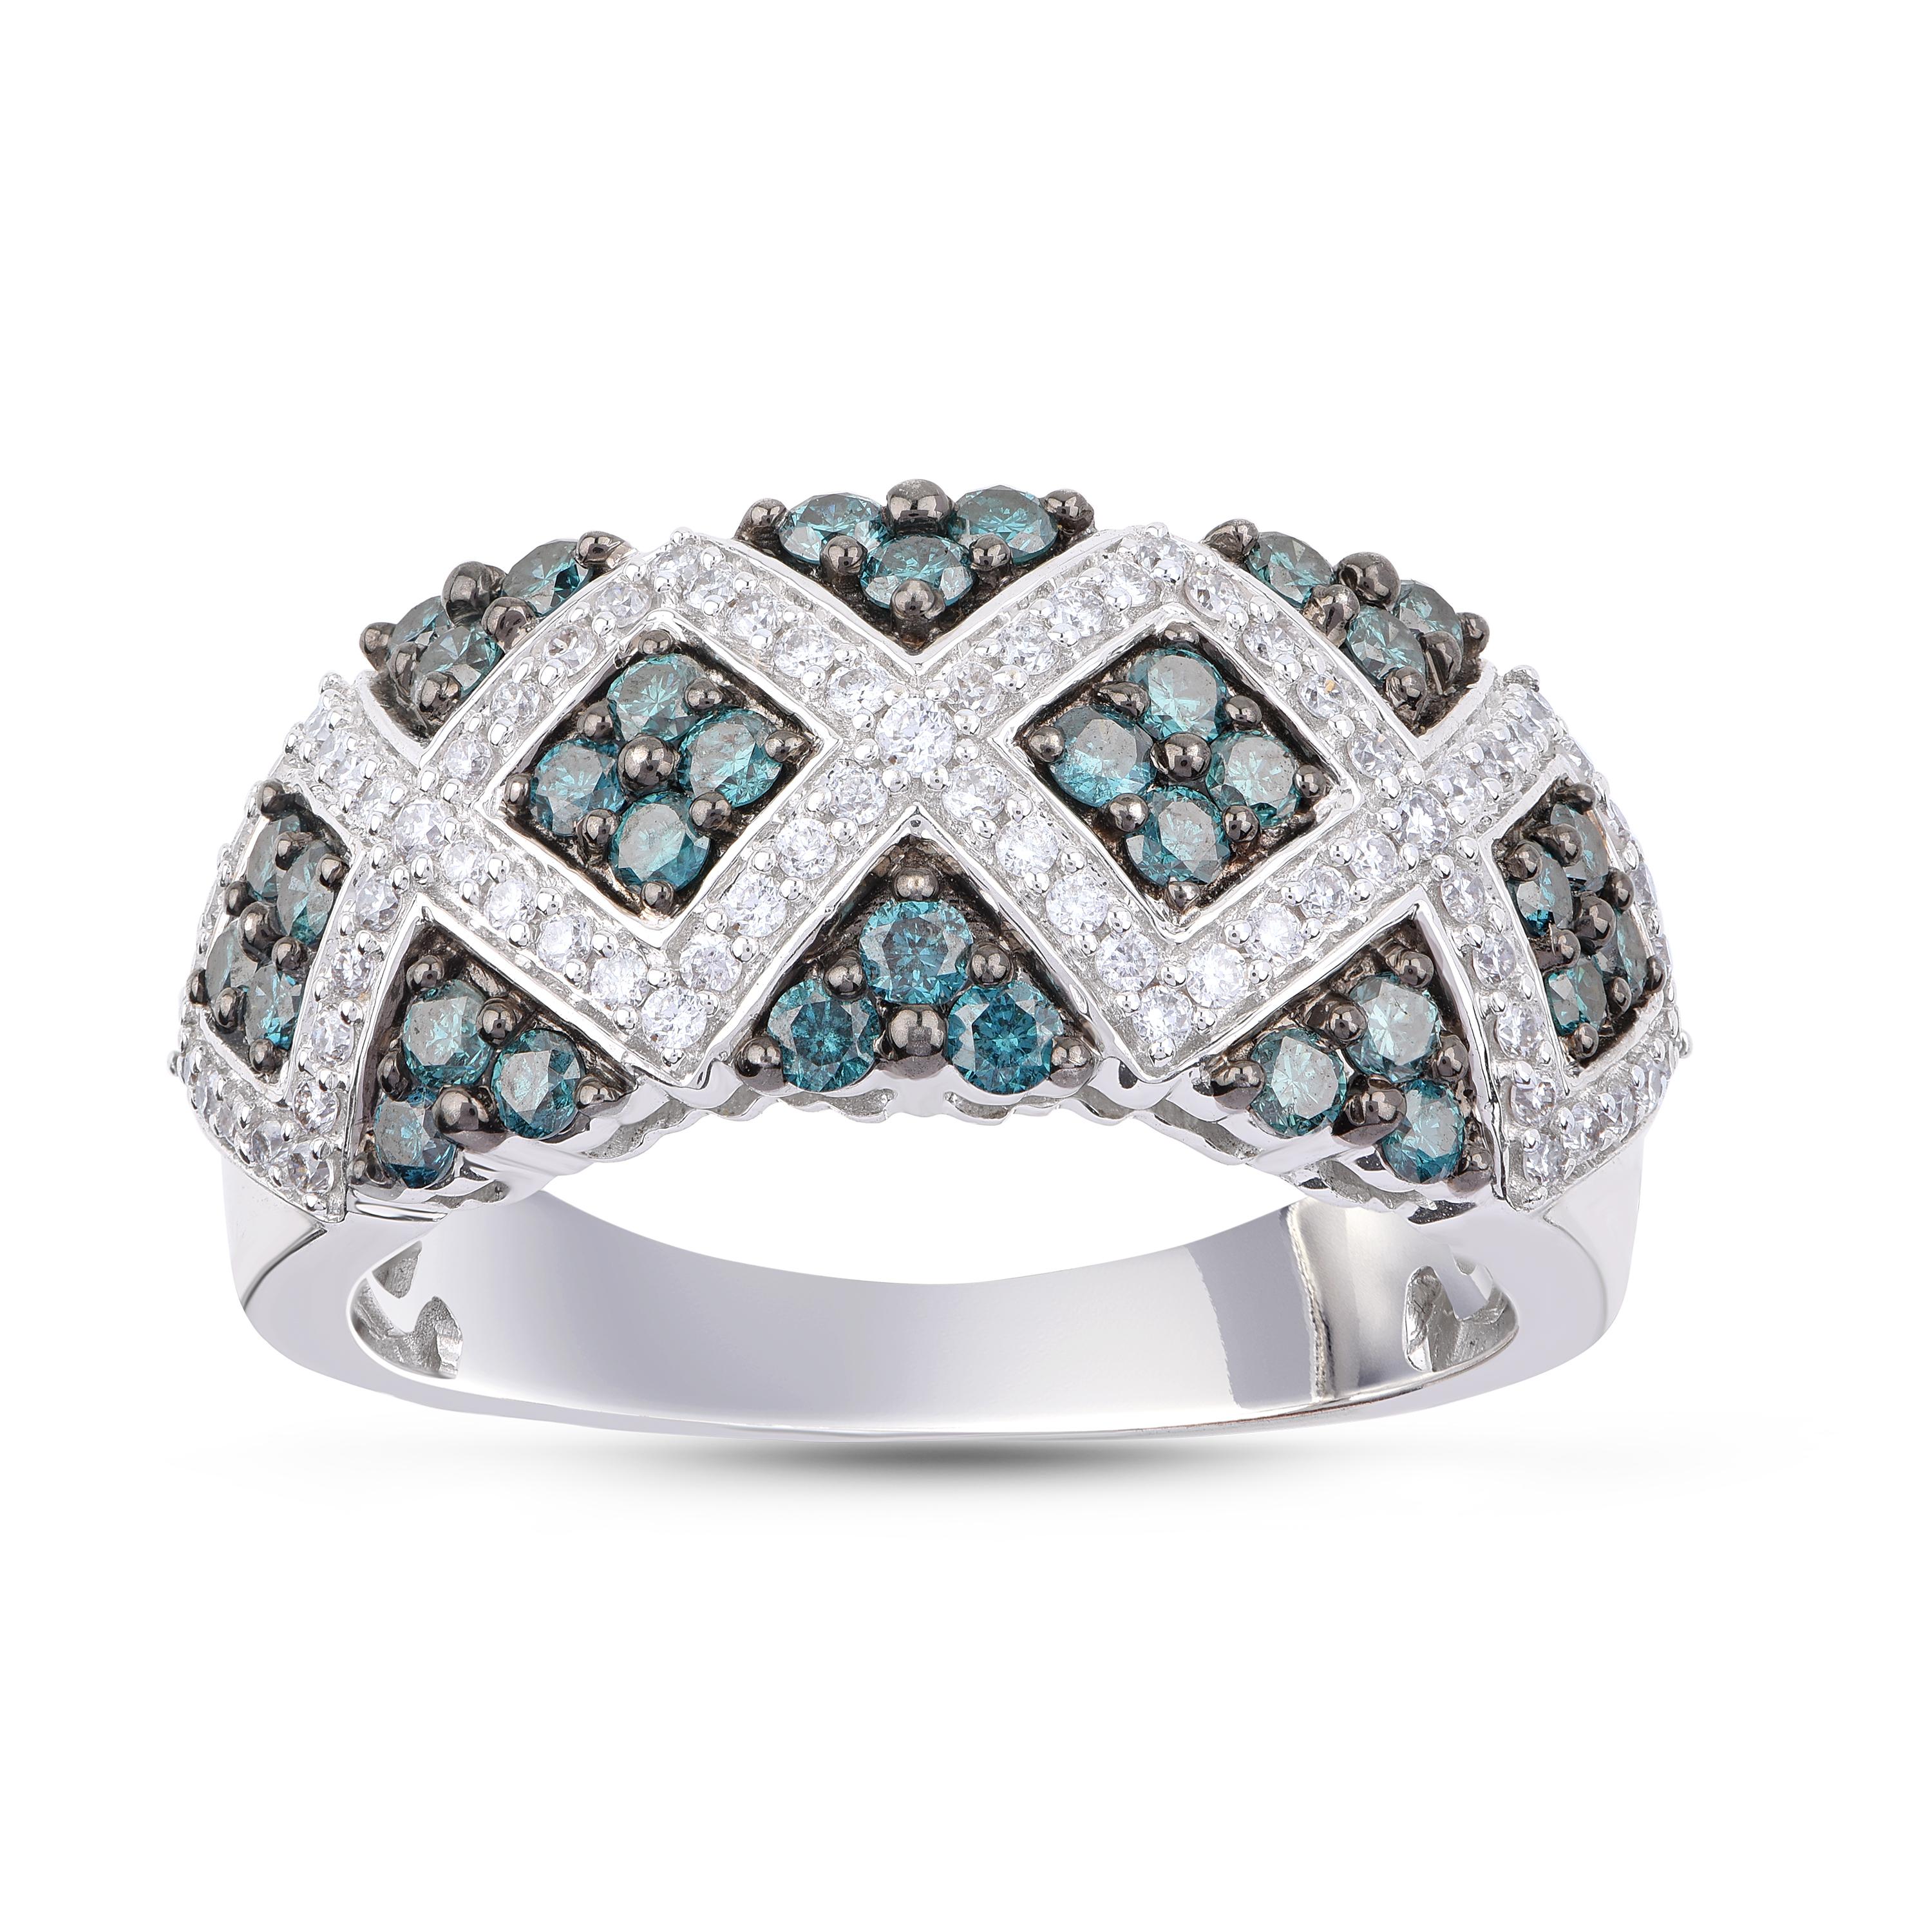 This diamond band is studded with 77 brilliant and 34 blue diamonds in prong and pave setting and designed in 18 kt white gold. Diamonds are graded H-I Color, I2 Clarity. 